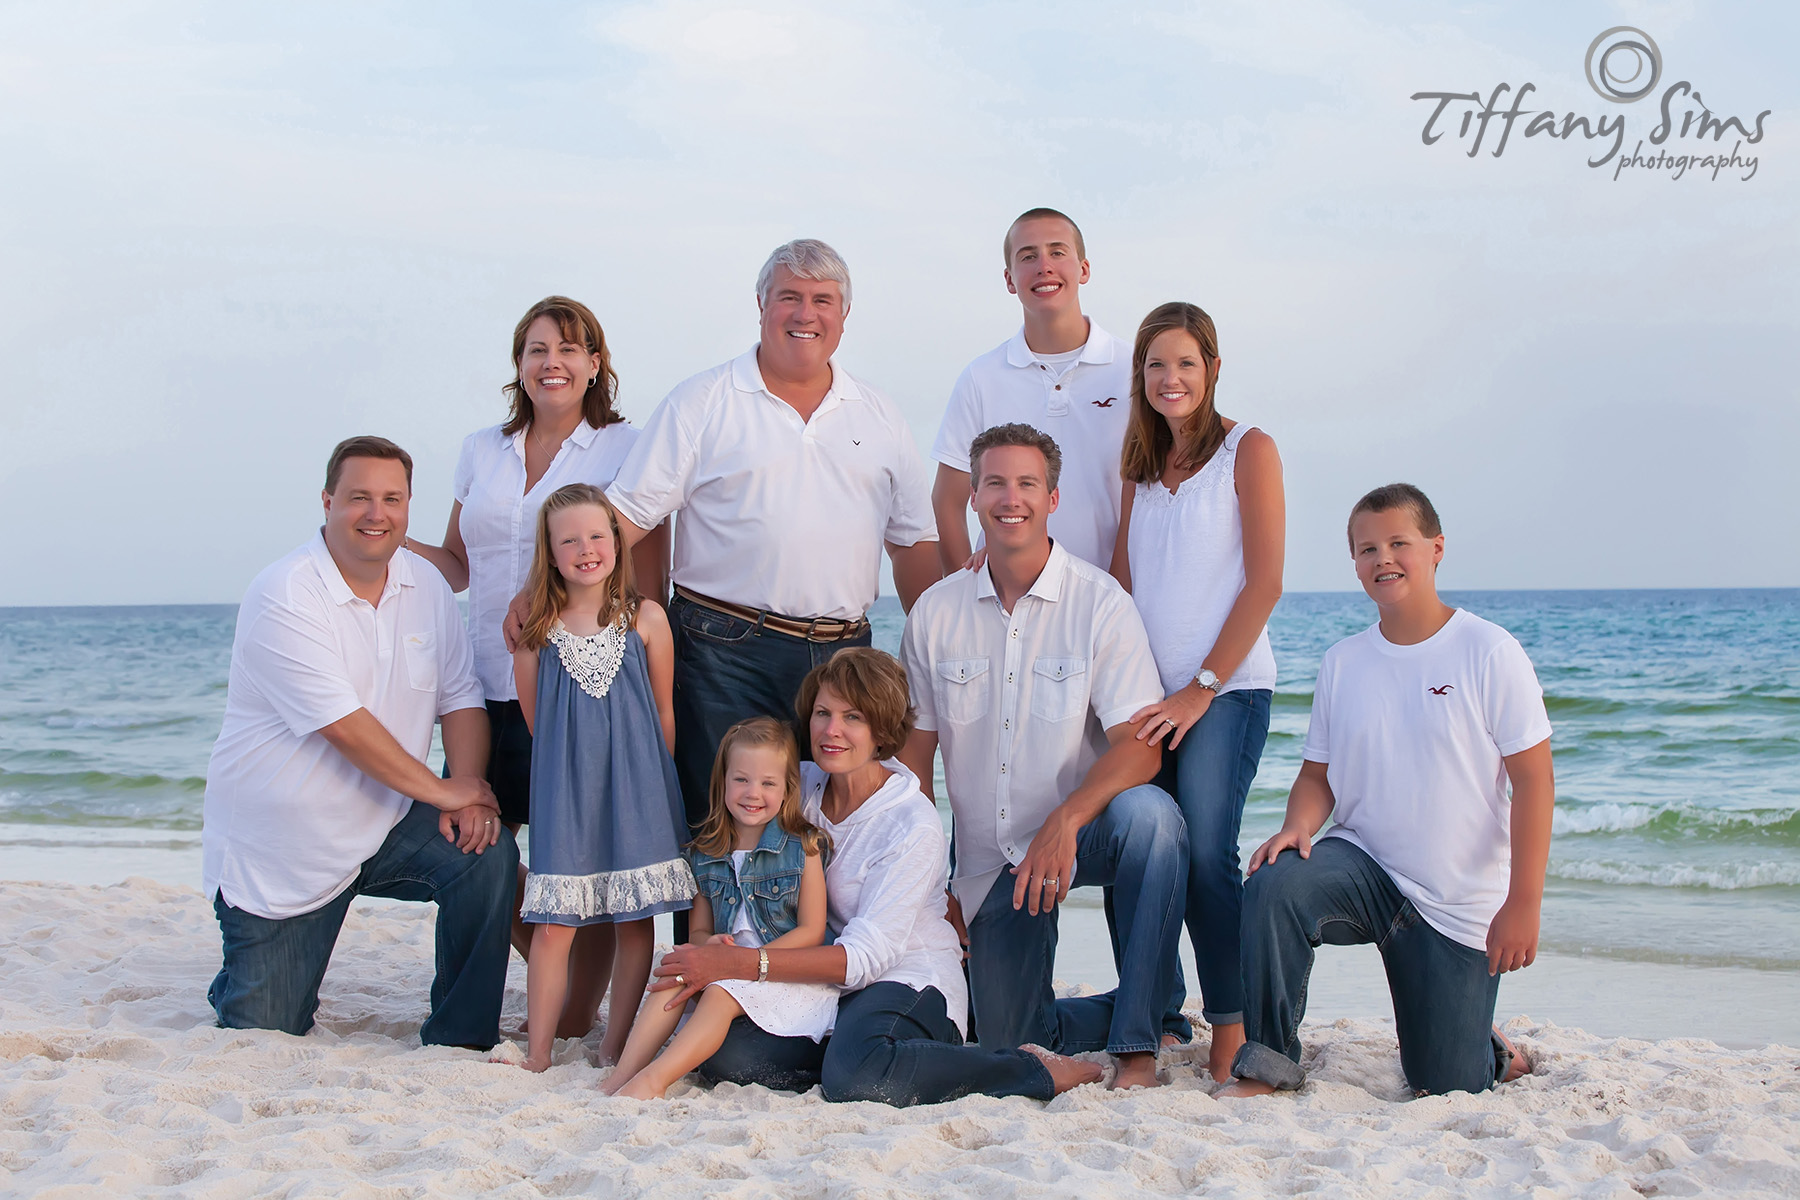 Destin Photography by Tiffany Sims Photography #destin #destinphotography #destinbeachphotography #30aphotography #30abeachphotography #destinphotographer #30aphotographer #fortwaltonbeachphotography #okaloosaislandphotography | KH50rw